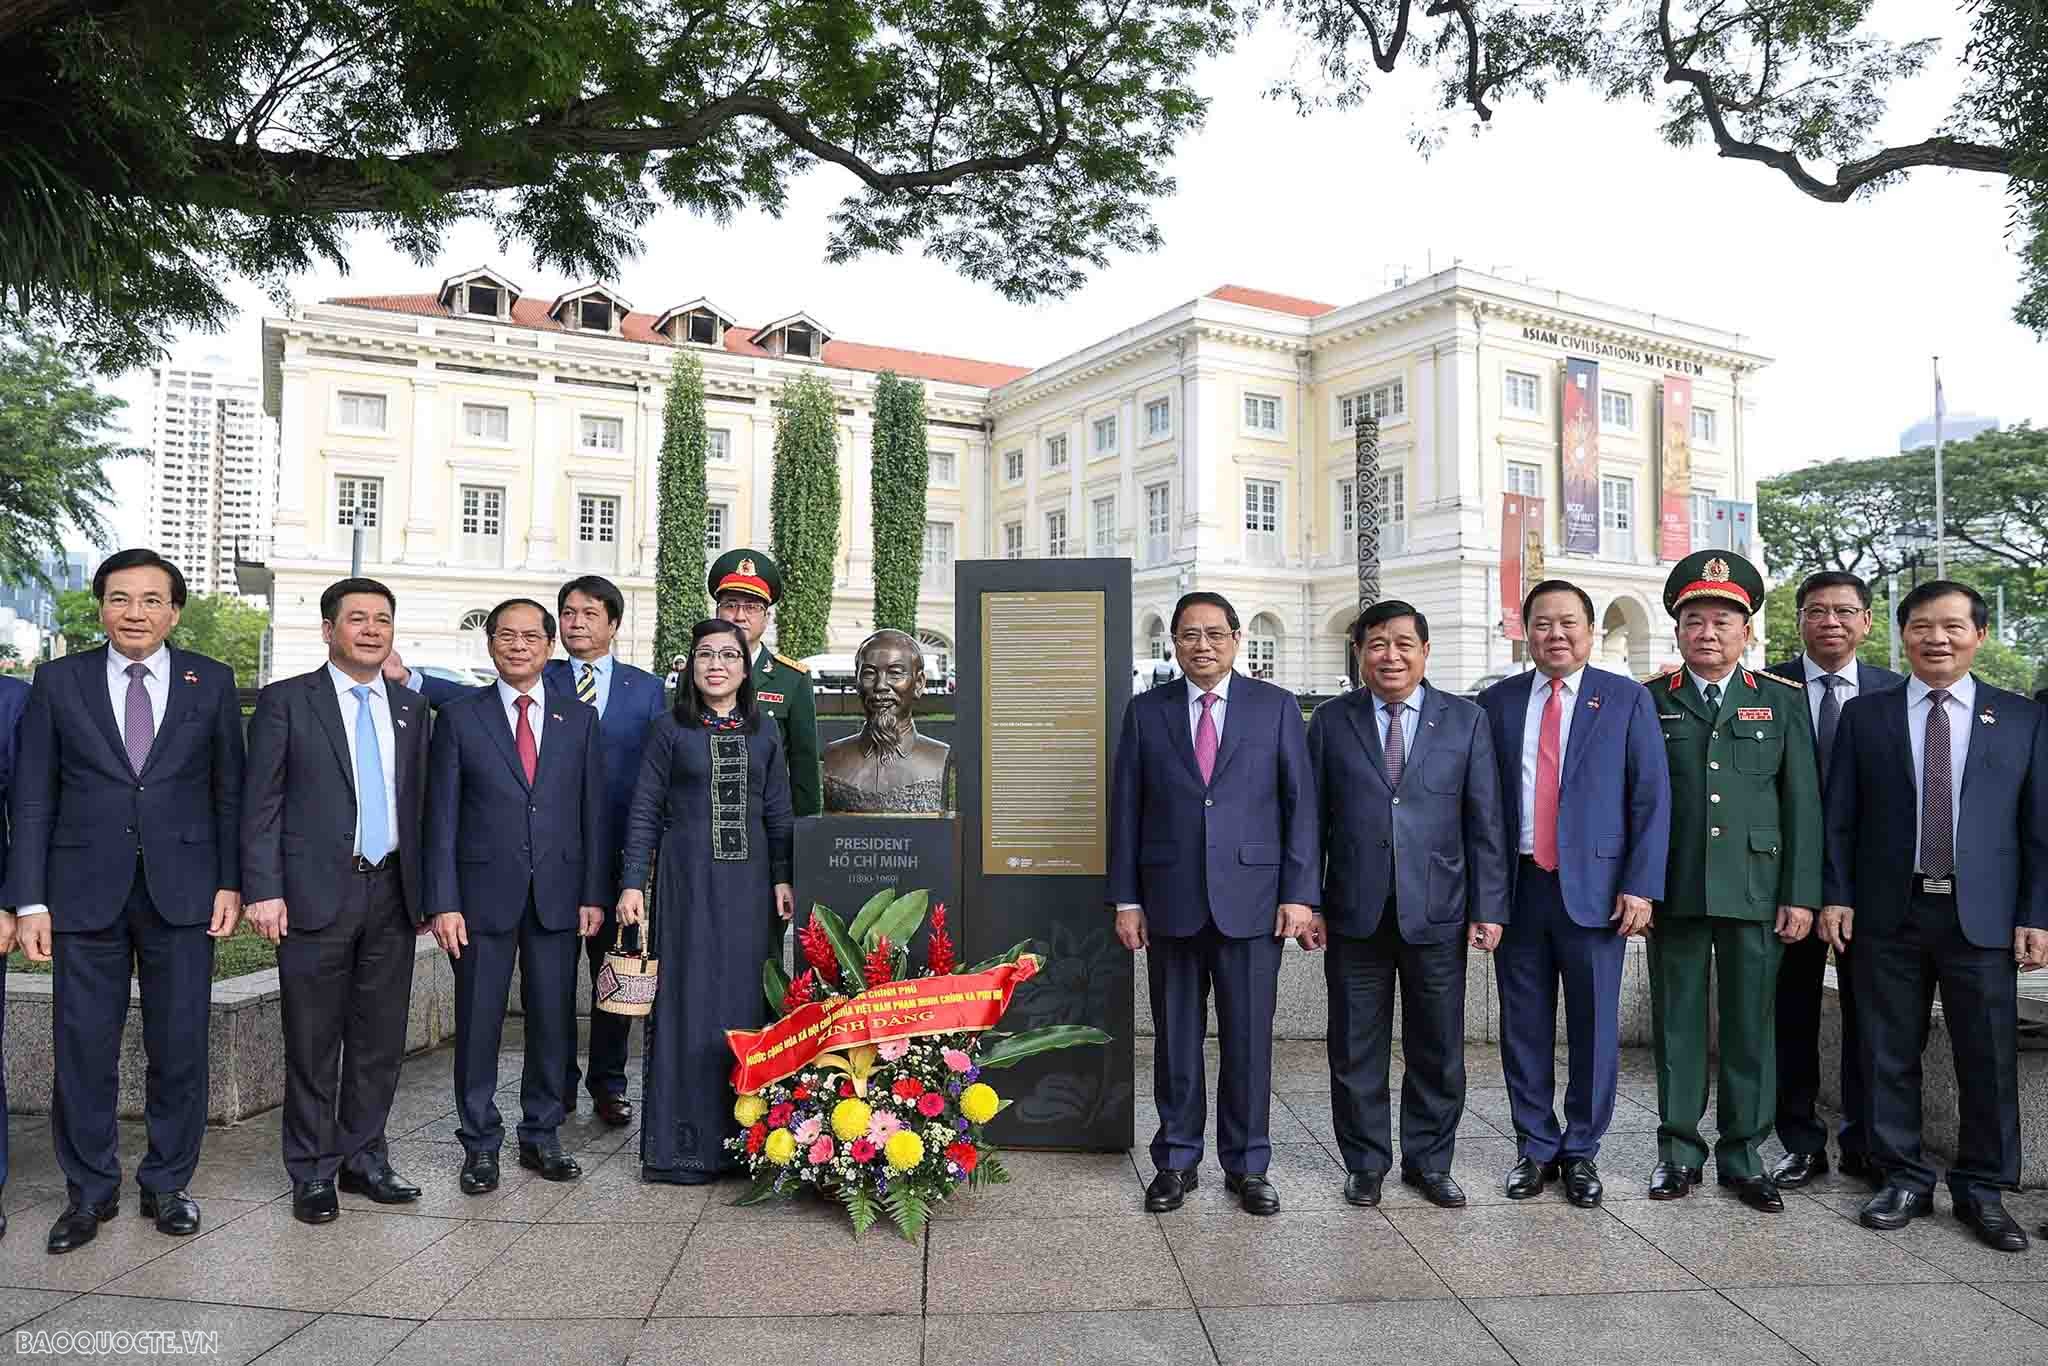 Prime Minister Pham Minh Chinh offers flowers at Ho Chi Minh Statue in Singapore